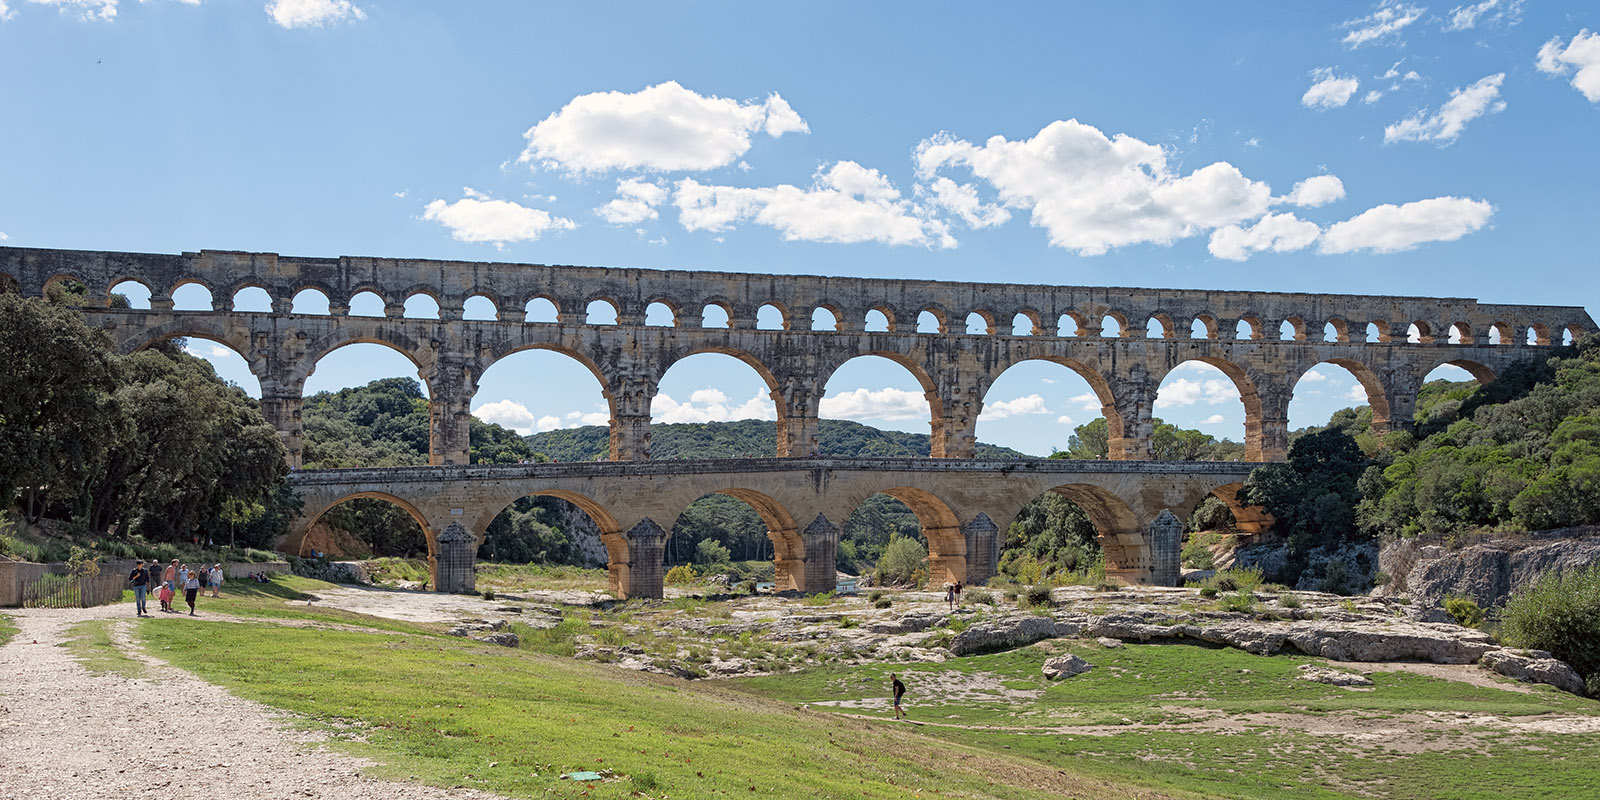 The 'Pont du Gard' has been crossing the Gardon for some 2,000 years!